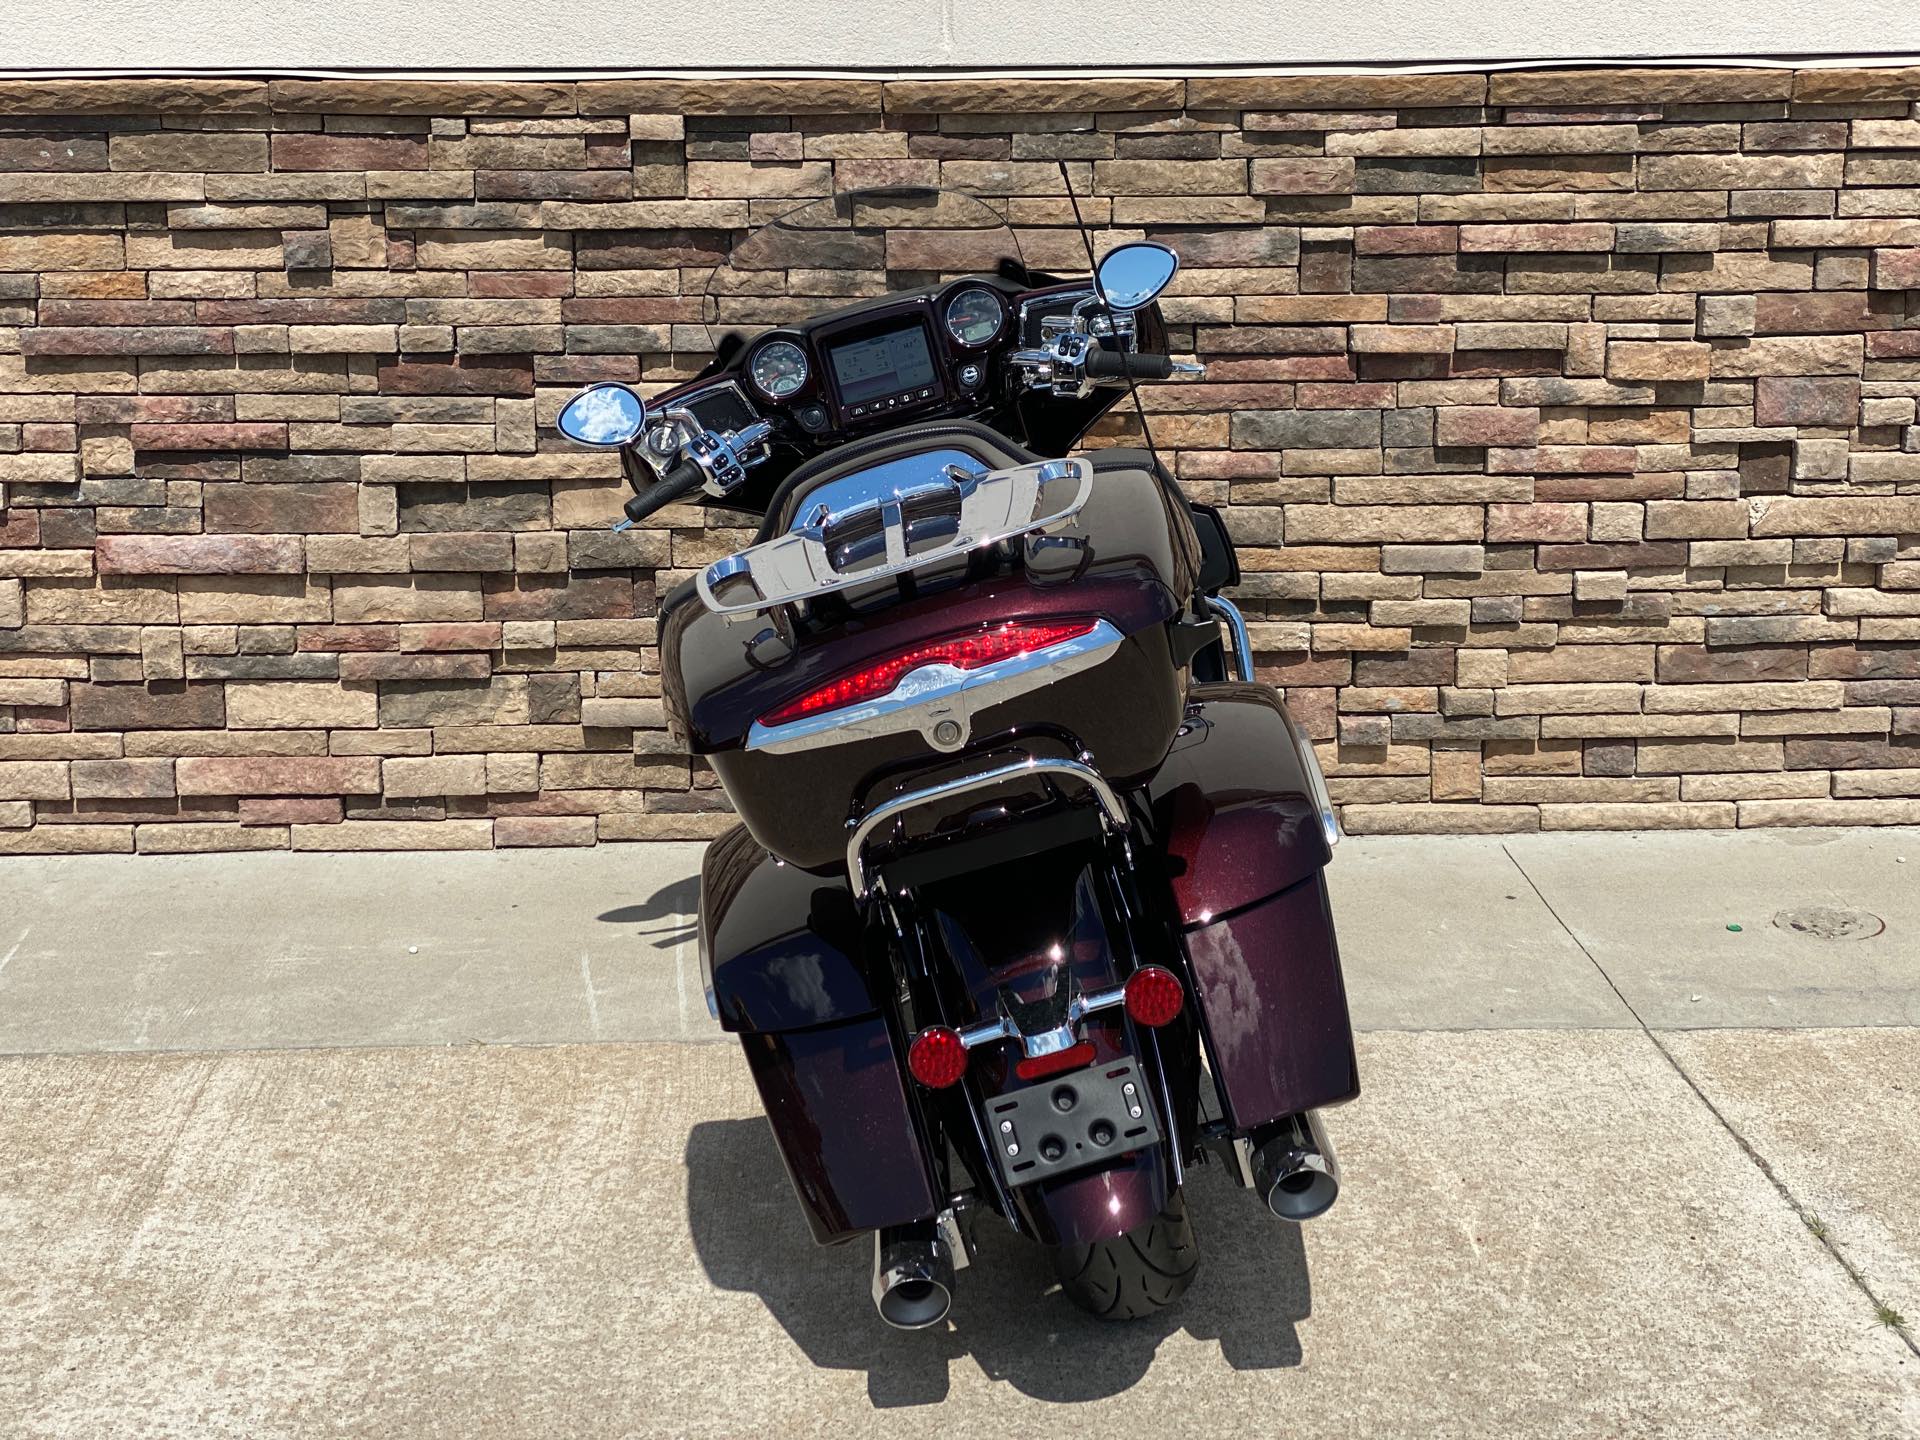 2022 Indian Roadmaster Limited at Head Indian Motorcycle